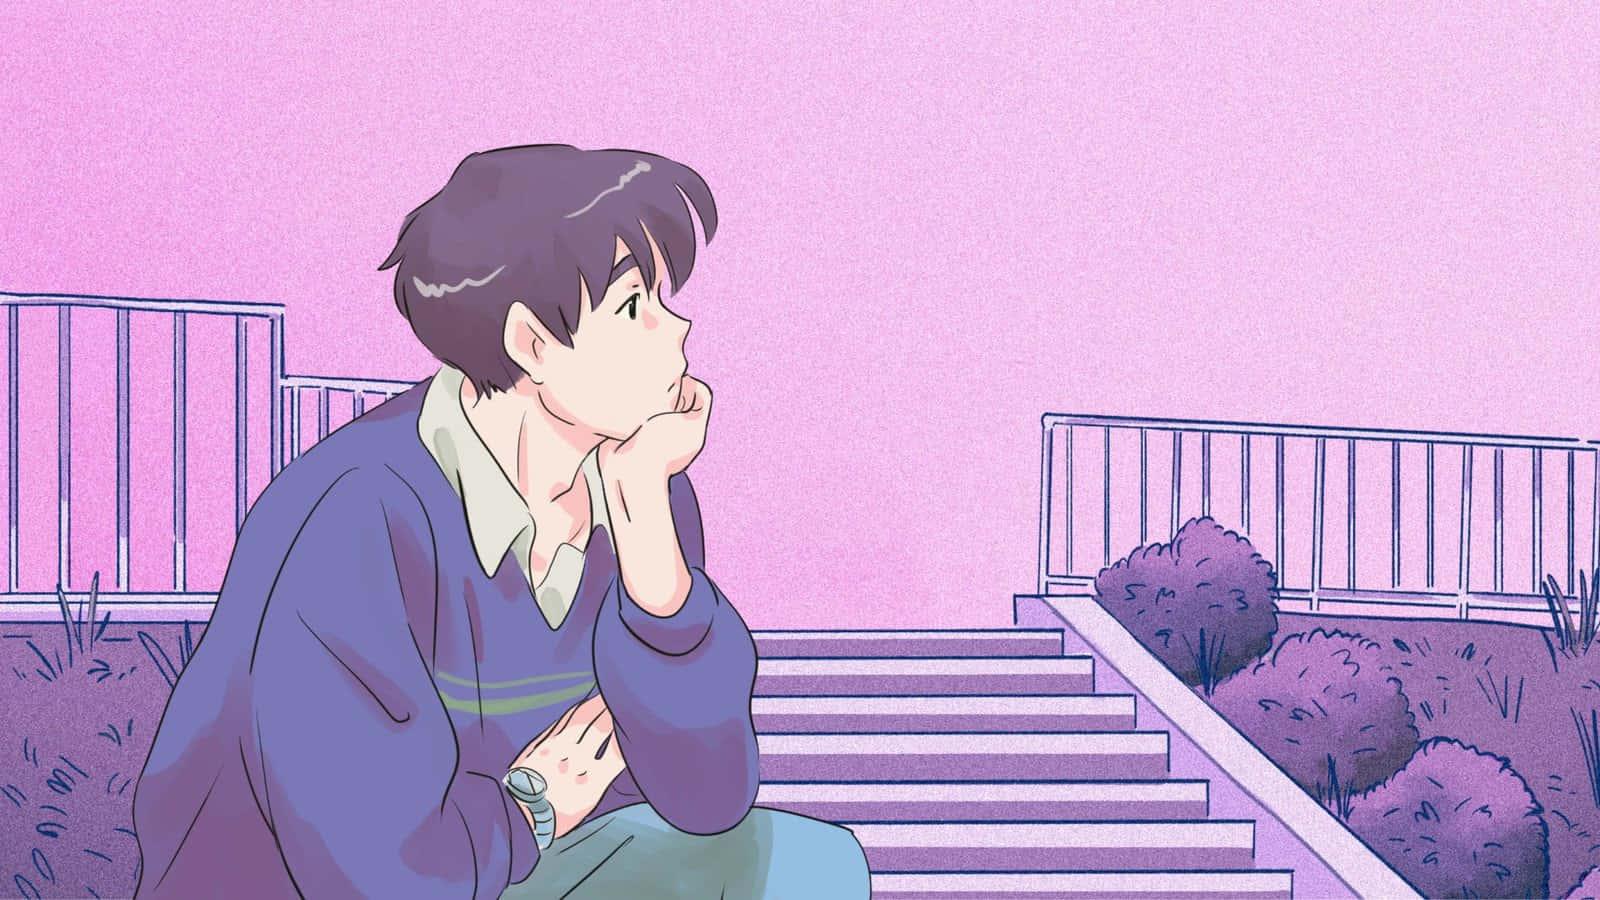 Character from Anime in pink aesthetic surroundings